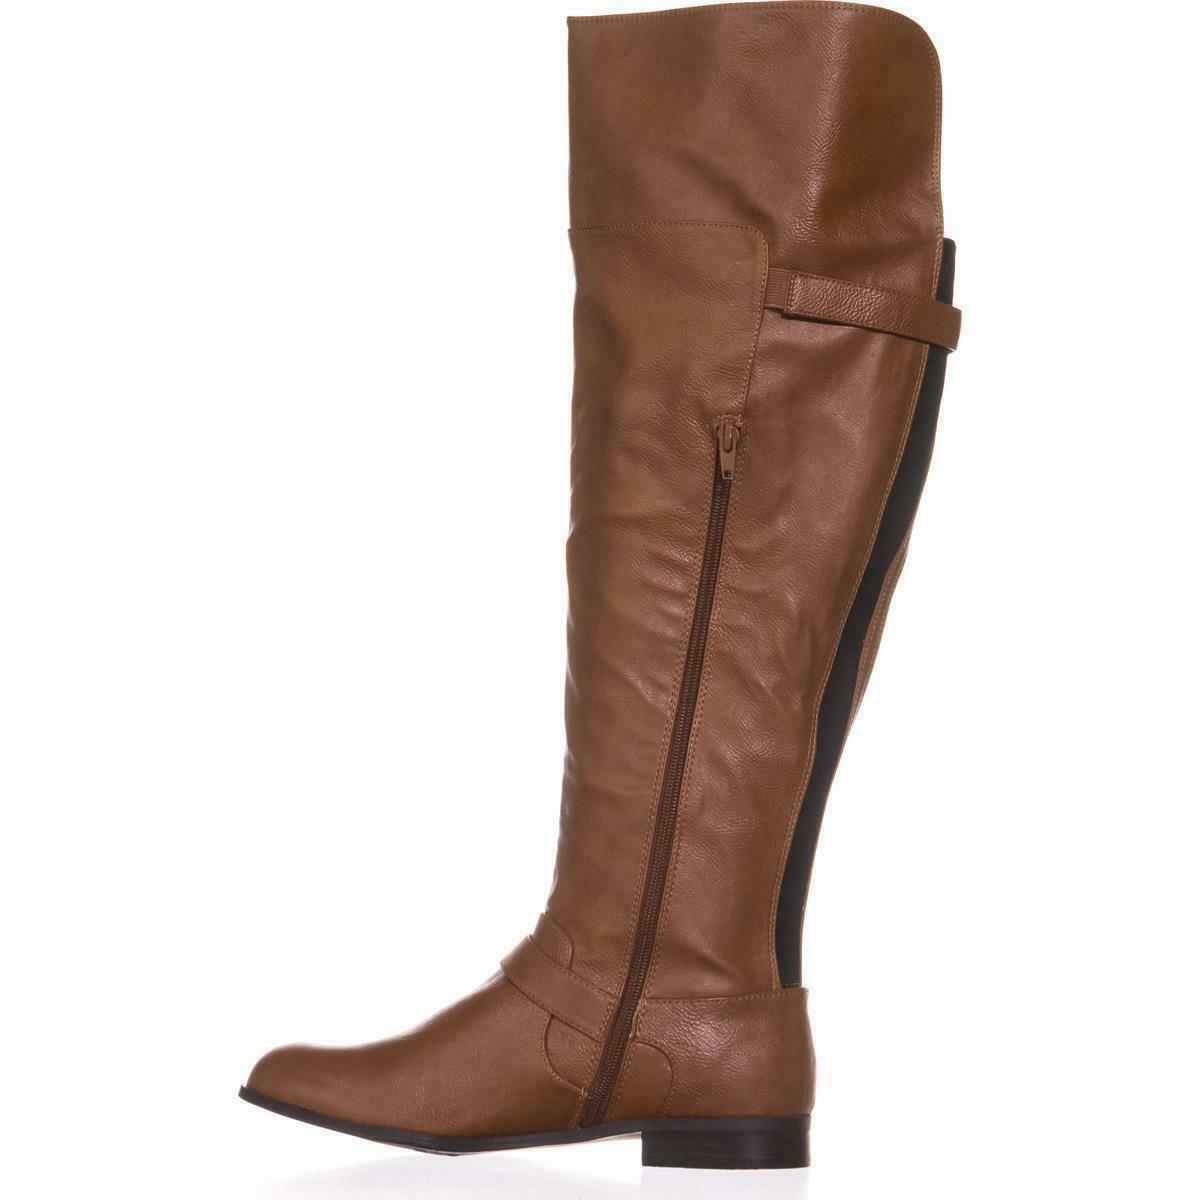 B35 Daphne Wide Calf Over-the-Knee Boots, Banana Bread - Boots